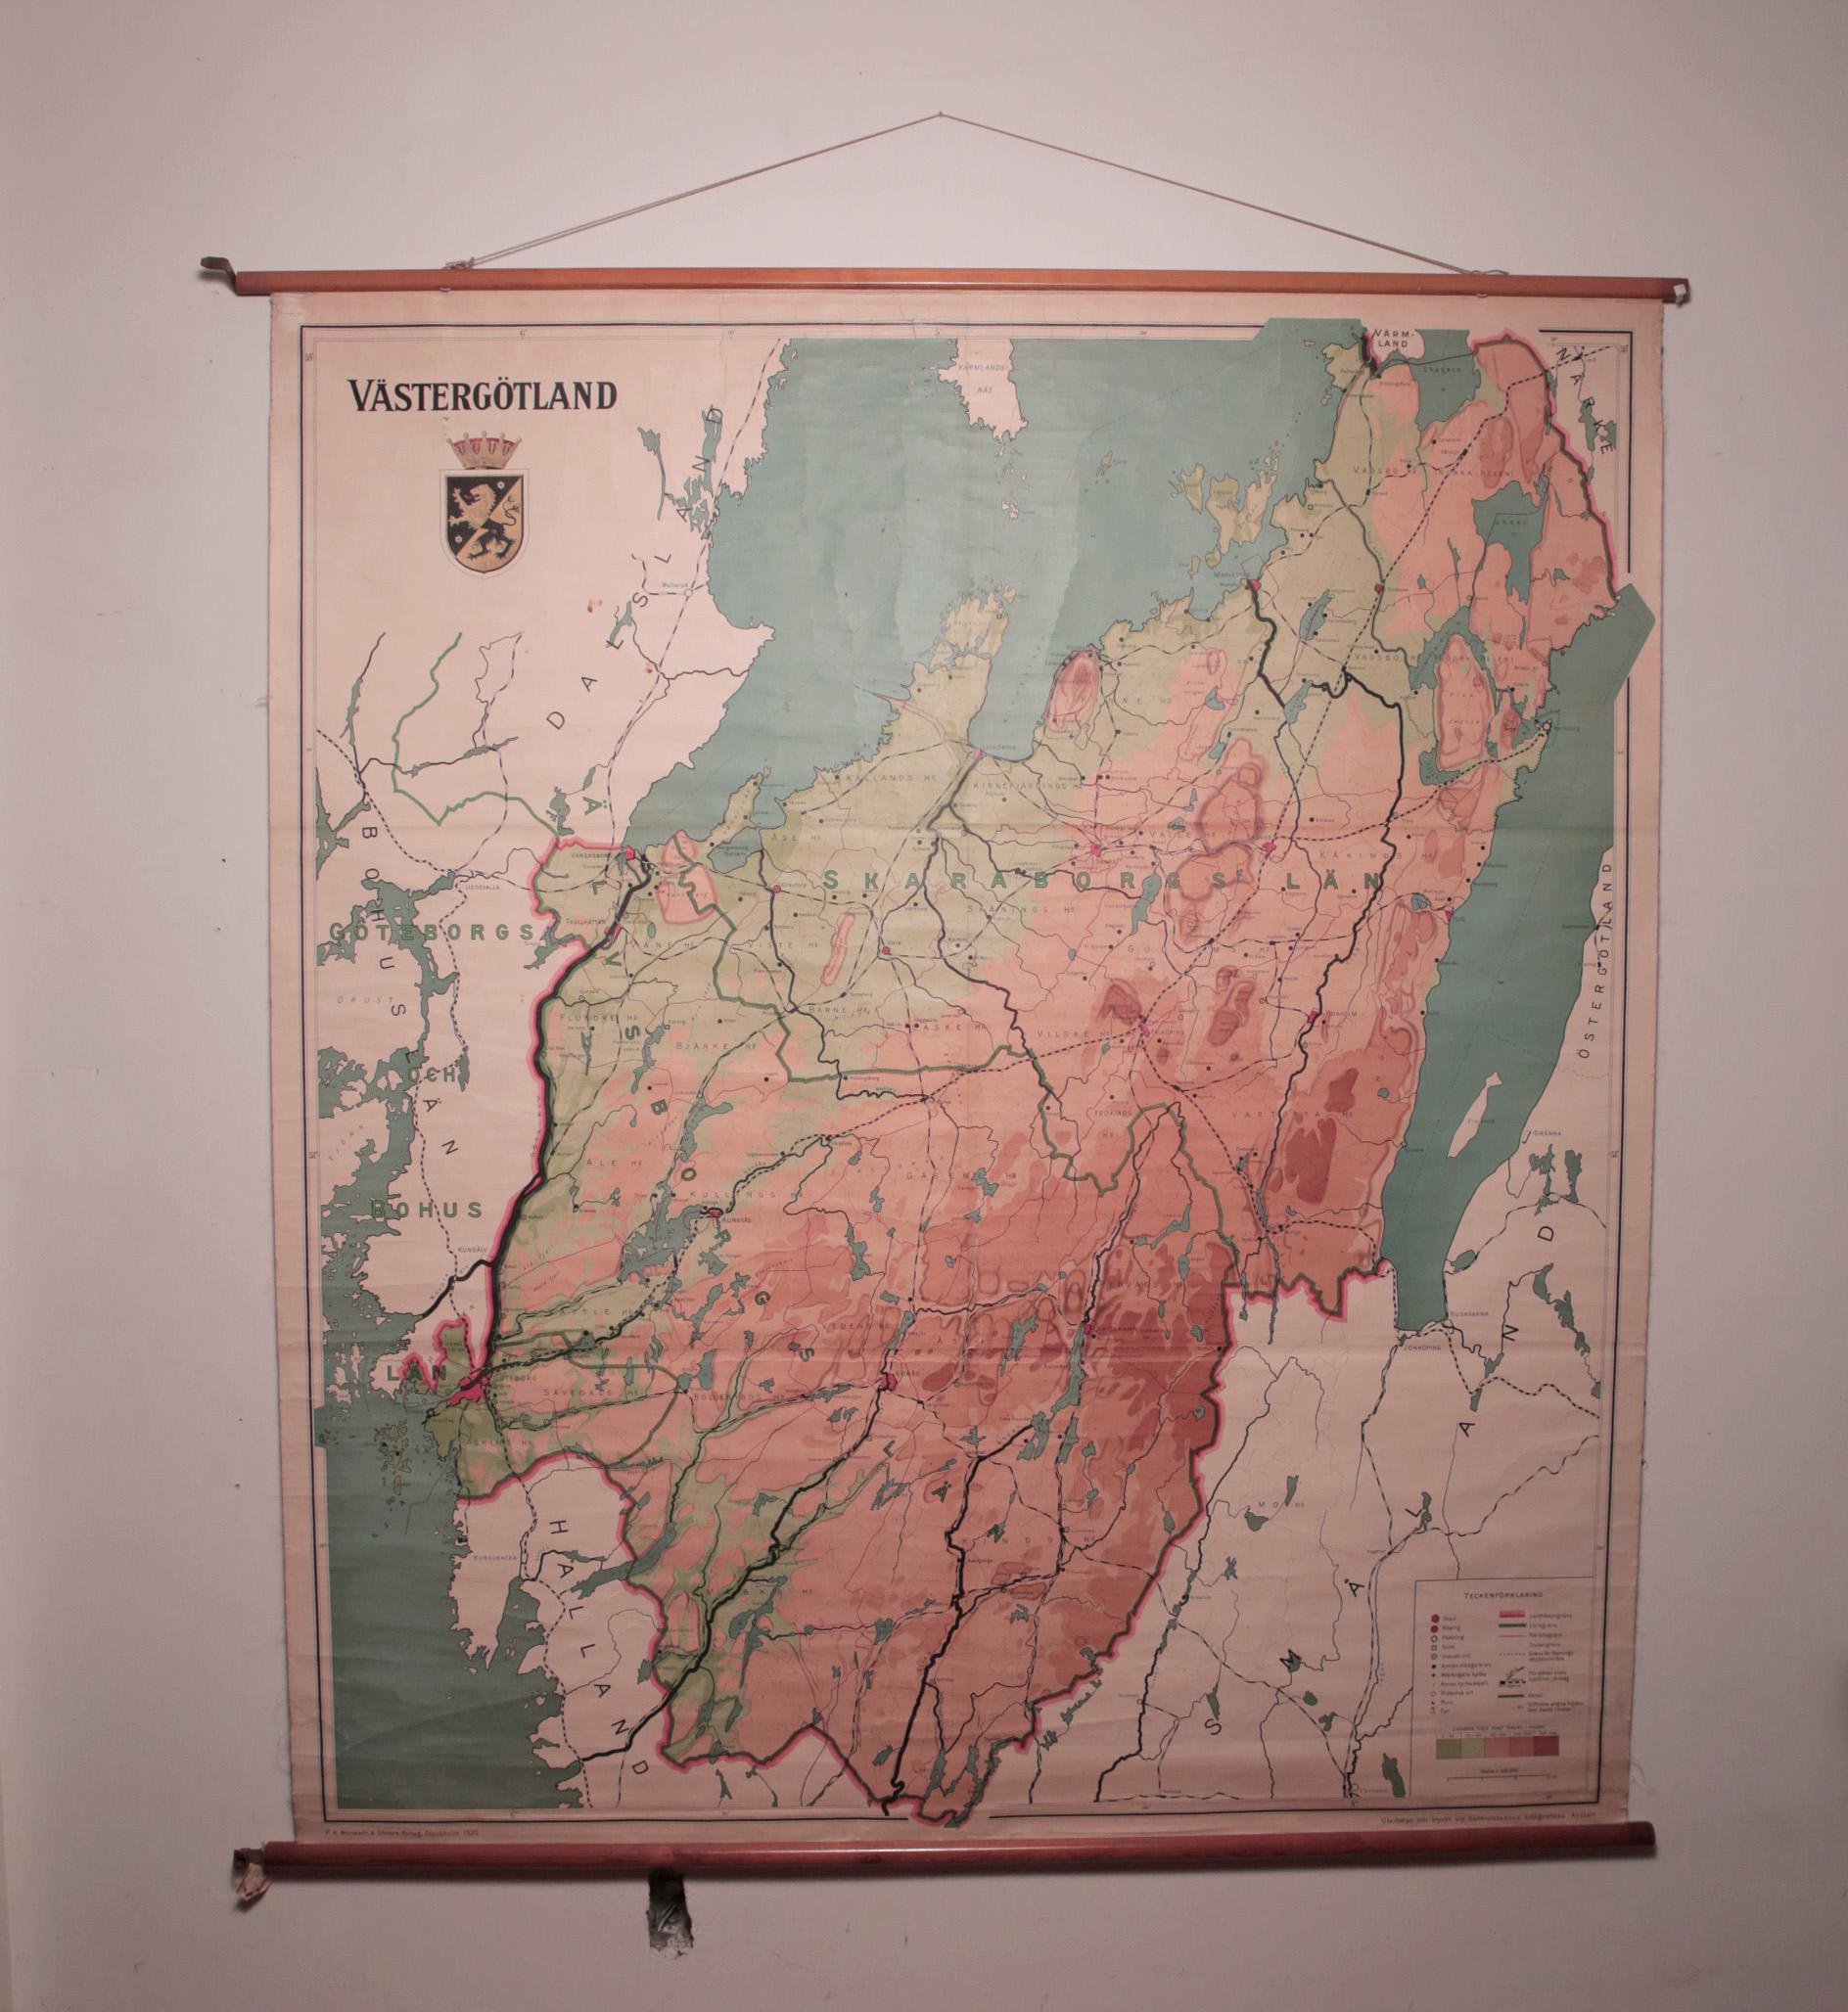 Vintage Swedish School Map of Vastergötland, Made in Sweden 1920

Västergötland also known as West Gothland or the Latinized version Westrogothia in older literature, is one of the 25 traditional non-administrative provinces of Sweden, situated in